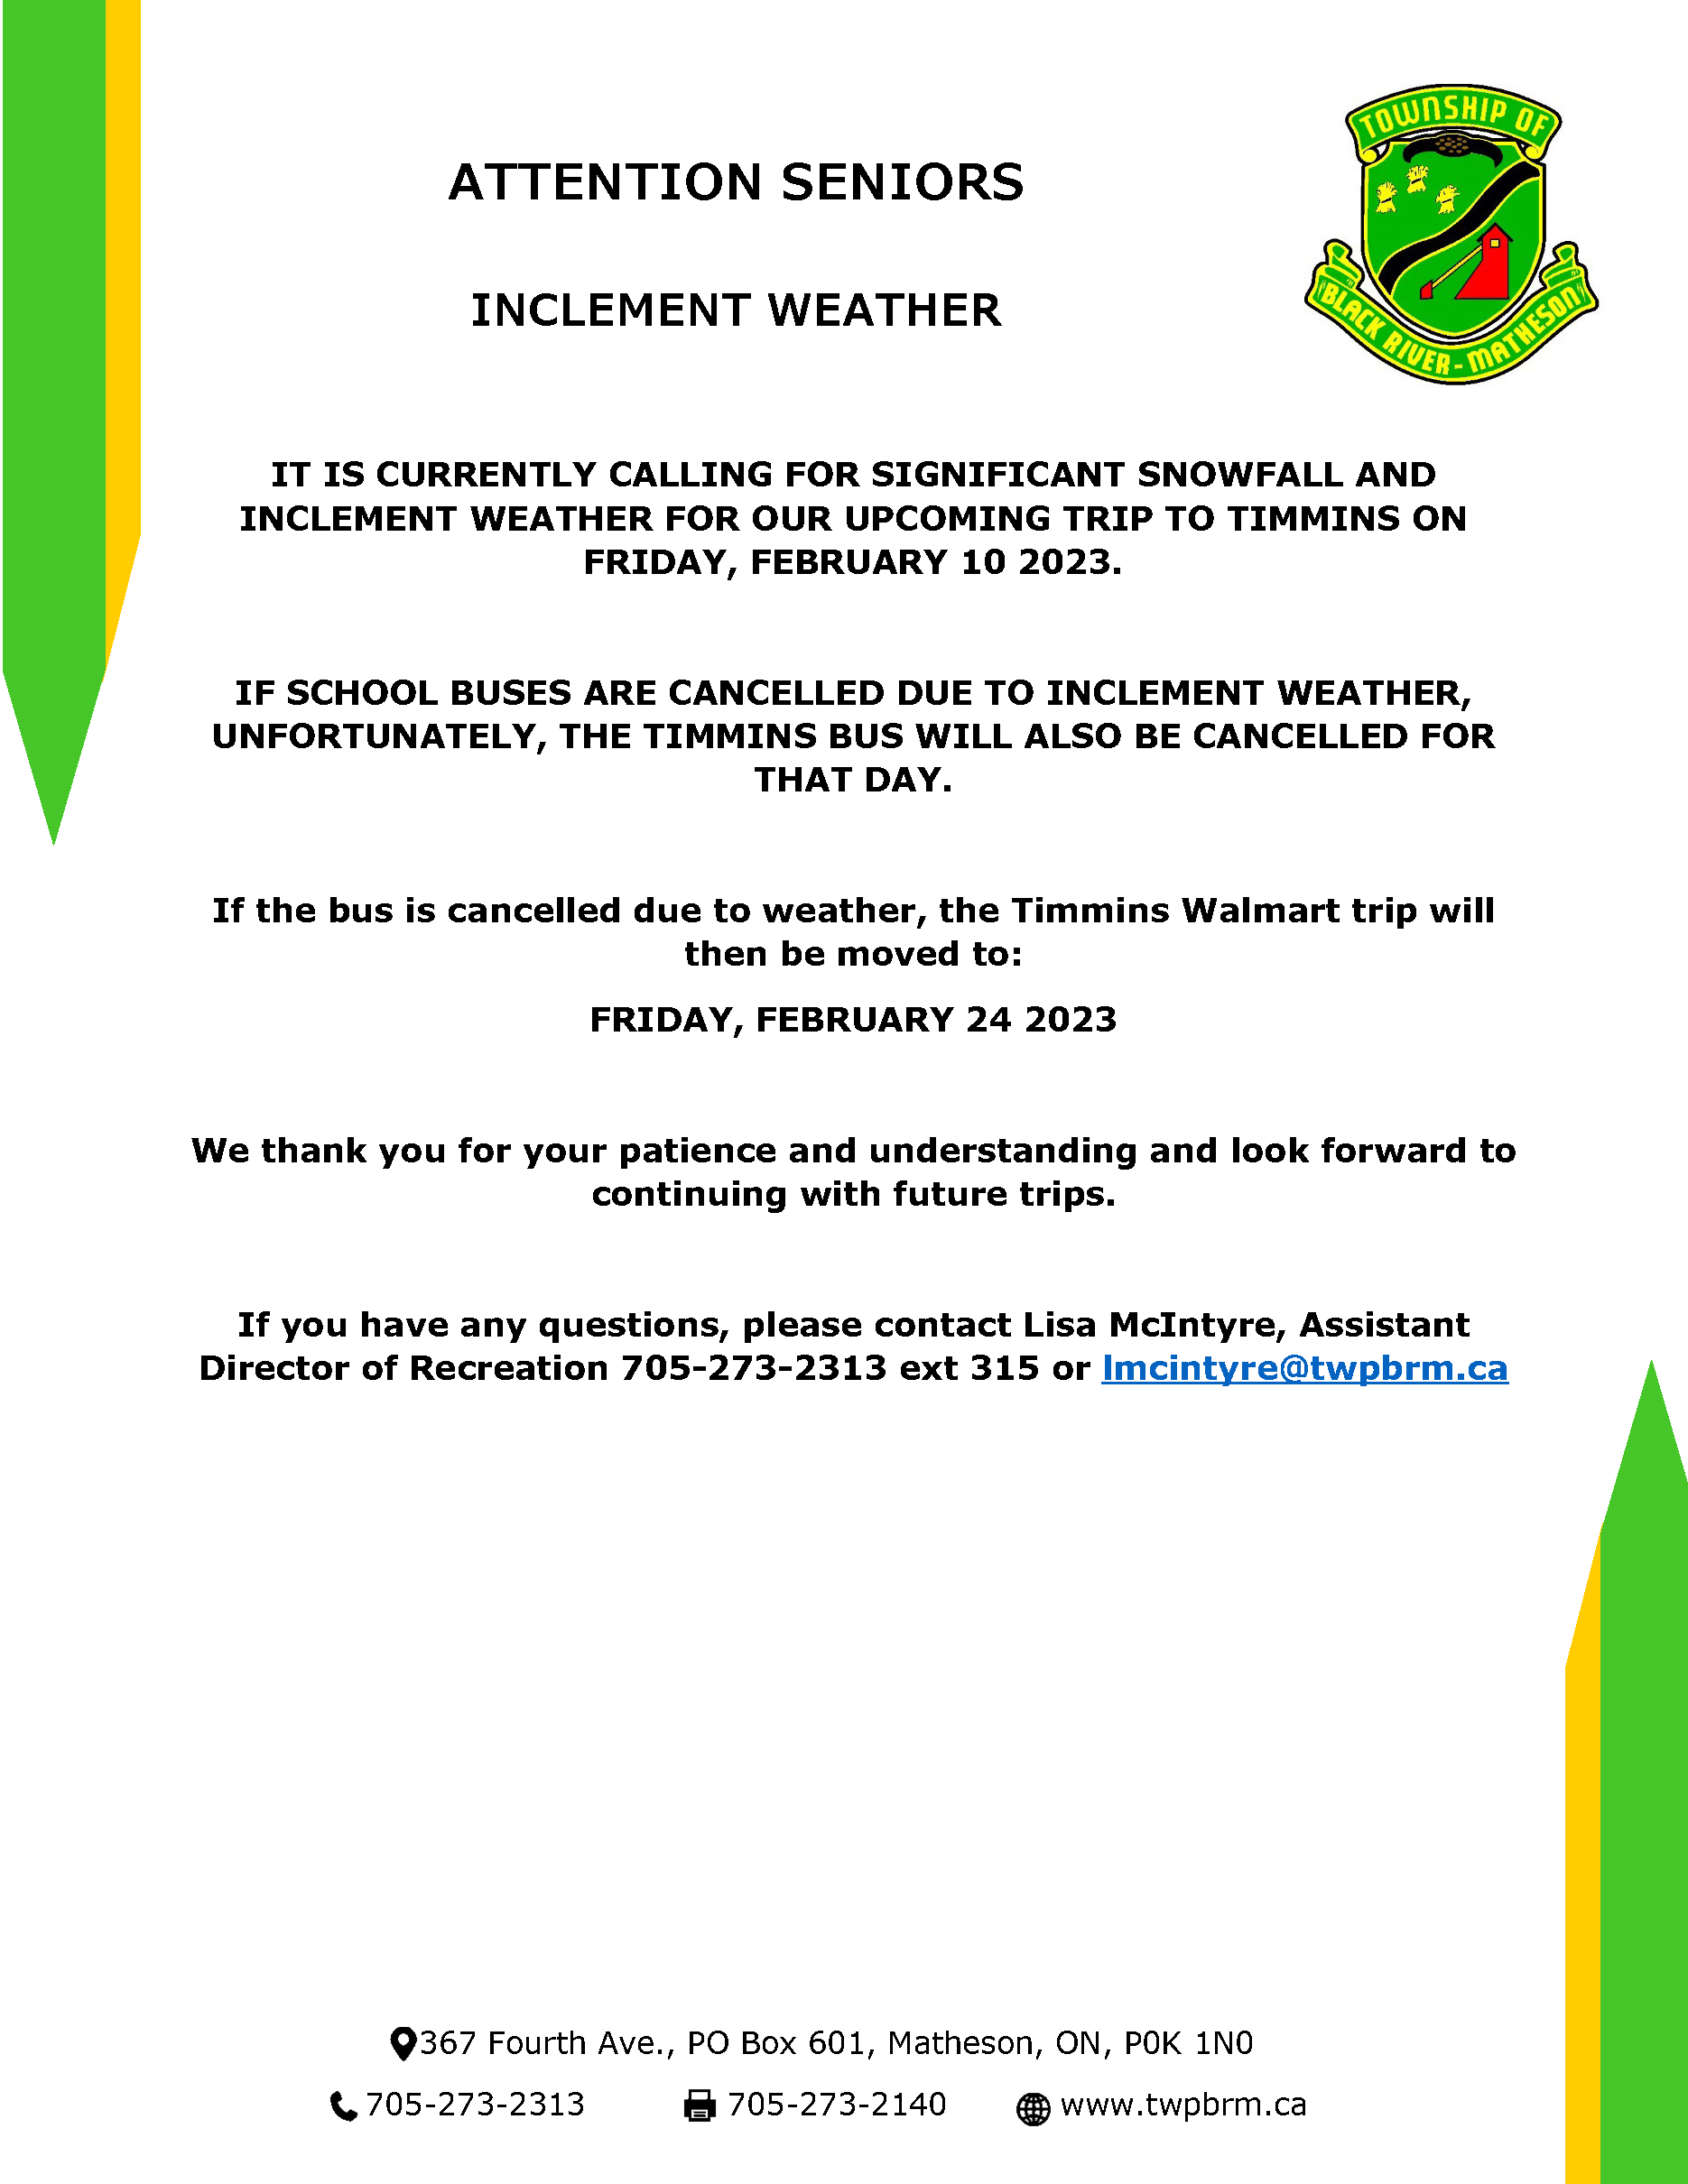 Inclement Weather Senior's Trip February 2023